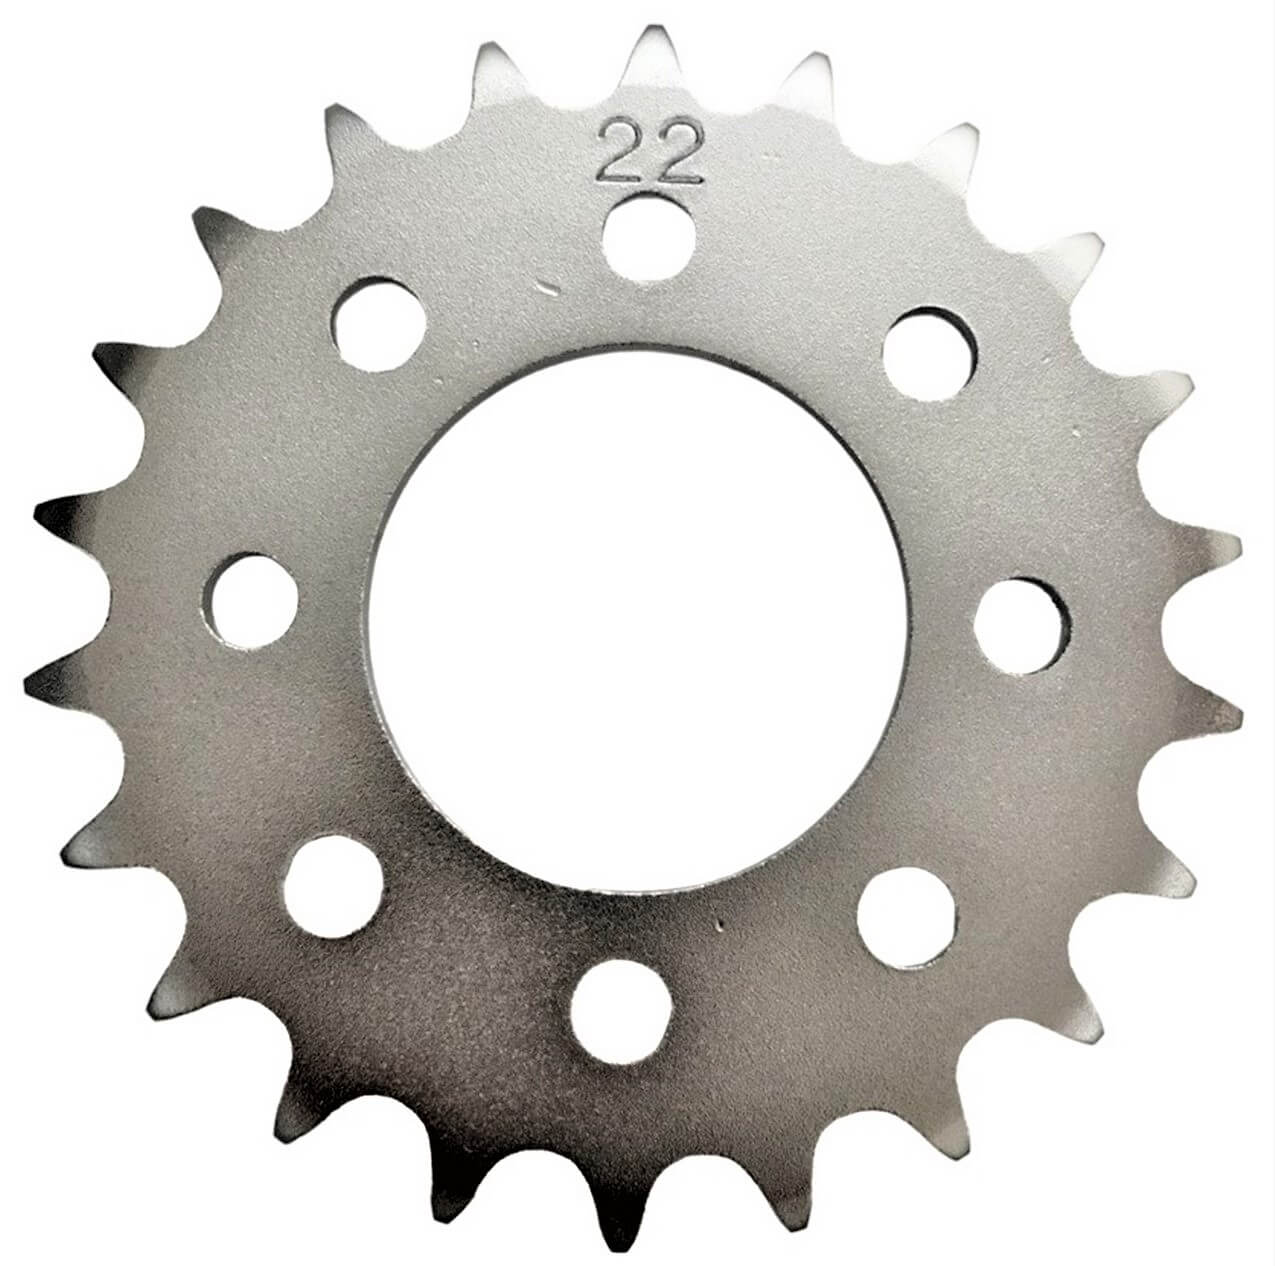 Rear Sprocket #415HD 22th Bolt Pattern=8 holes each are 24mm Ctr to Ctr, Shaft=42mm TOMOS A35/A55